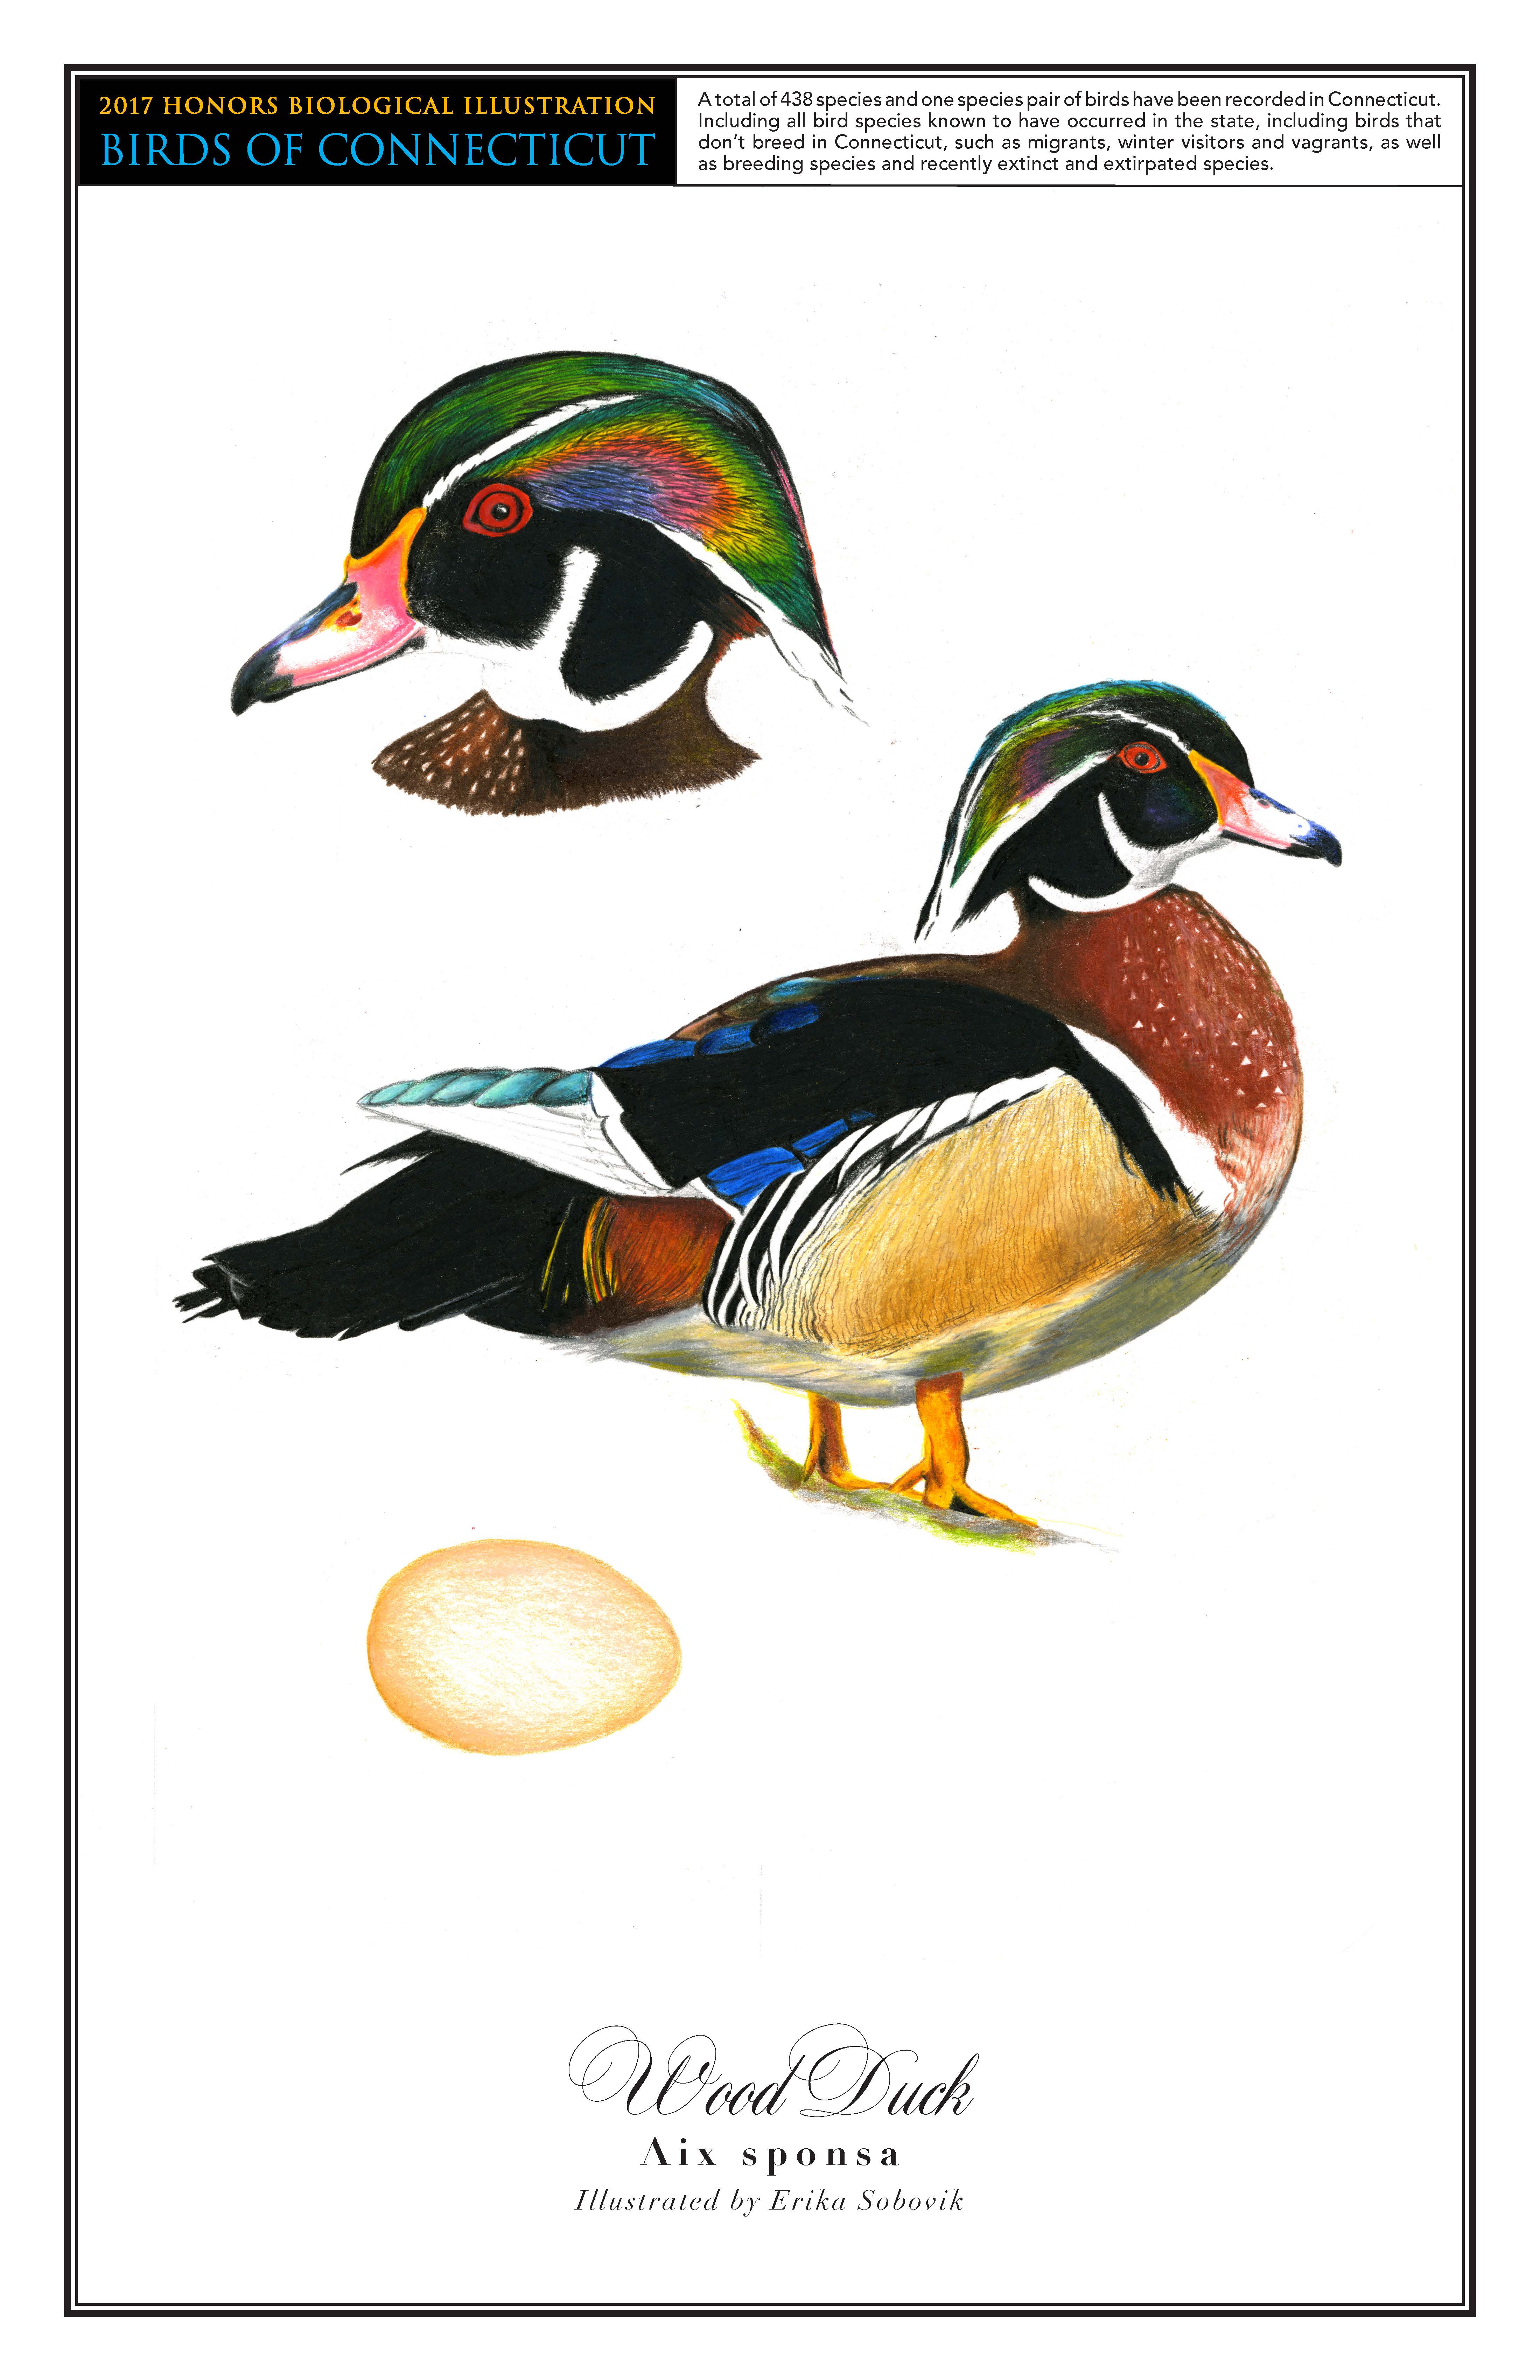 The wood duck has a black and green head, brown chest, and tan stomach. Its feathers are mostly black and a little white, green, and blue. A drawing of it standing is in the middle of the page. A close up drawing of its head is in the top left corner, and a drawing of its yellowish egg is on the bottom left.